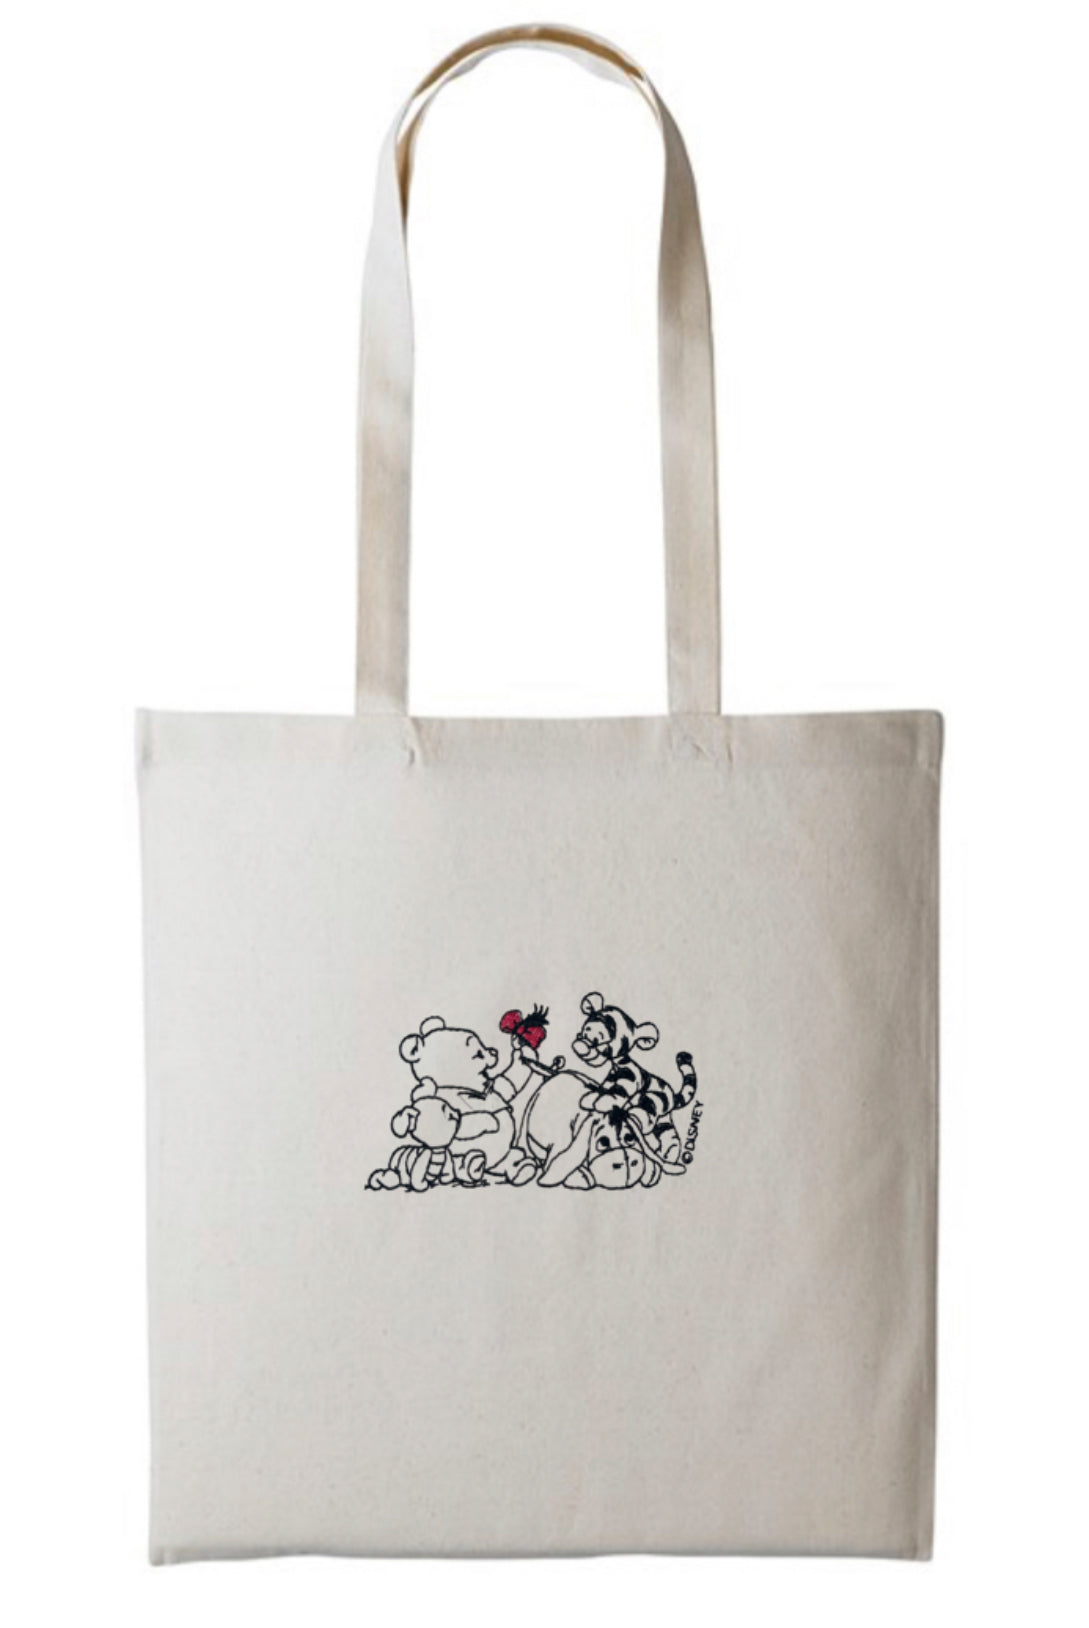 Winnie The Pooh and Friends Silhouette Long Handle Cotton Tote Bag For Life